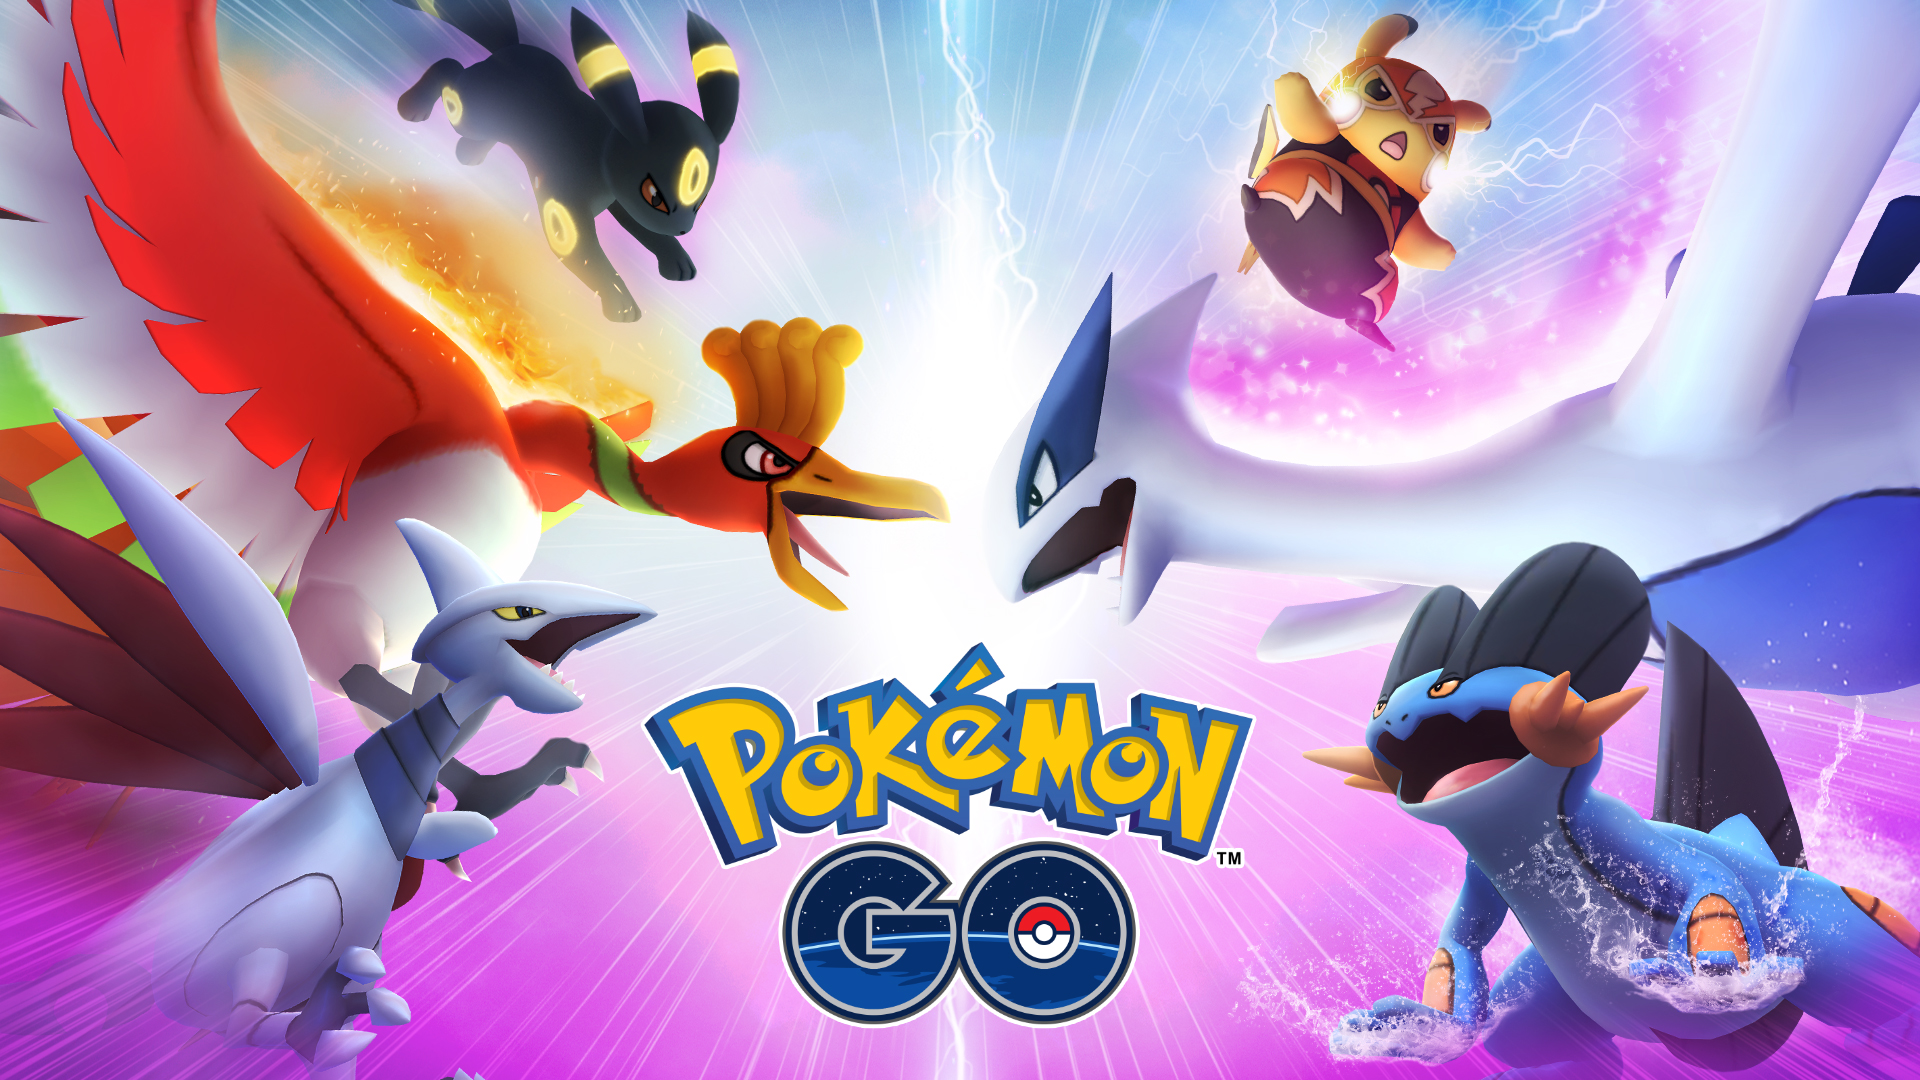 Pokémon Go updates: all the news and rumors